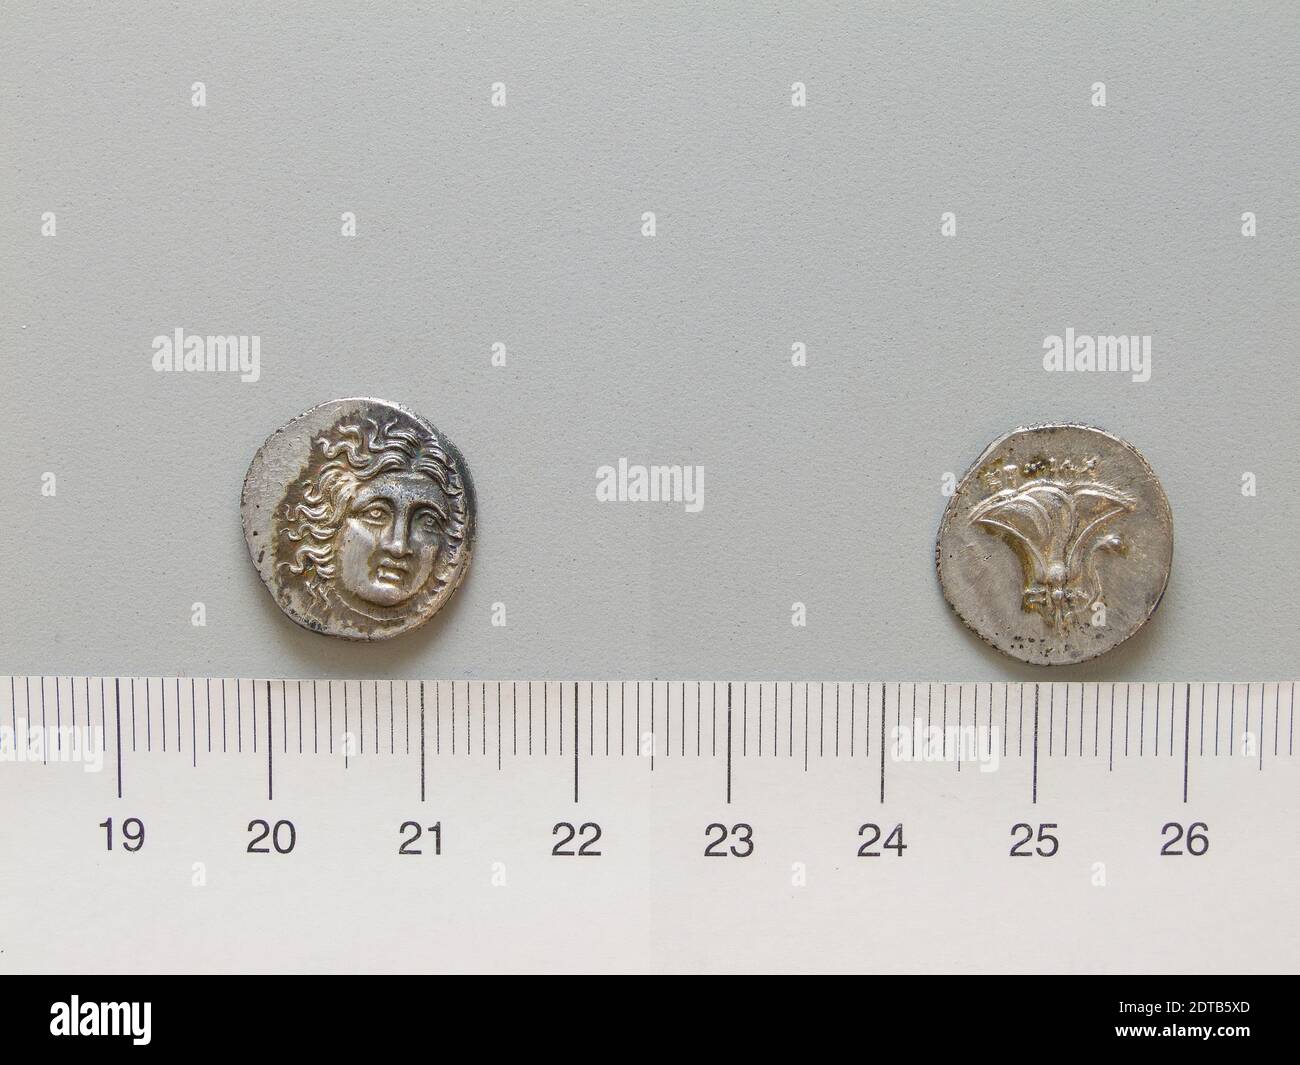 Ruler: Perseus, King of Macedonia, ca. 212–166 B.C., ruled 178–168 B.C.Mint: Rhodes, 1 Drachm of Perseus, King of Macedonia from Rhodes, 170–168 B.C. (?), Silver, 2.63 g, 12:00, 16 mm, Made in Rhodes, Greece, Greek, 2nd century B.C., Numismatics Stock Photo